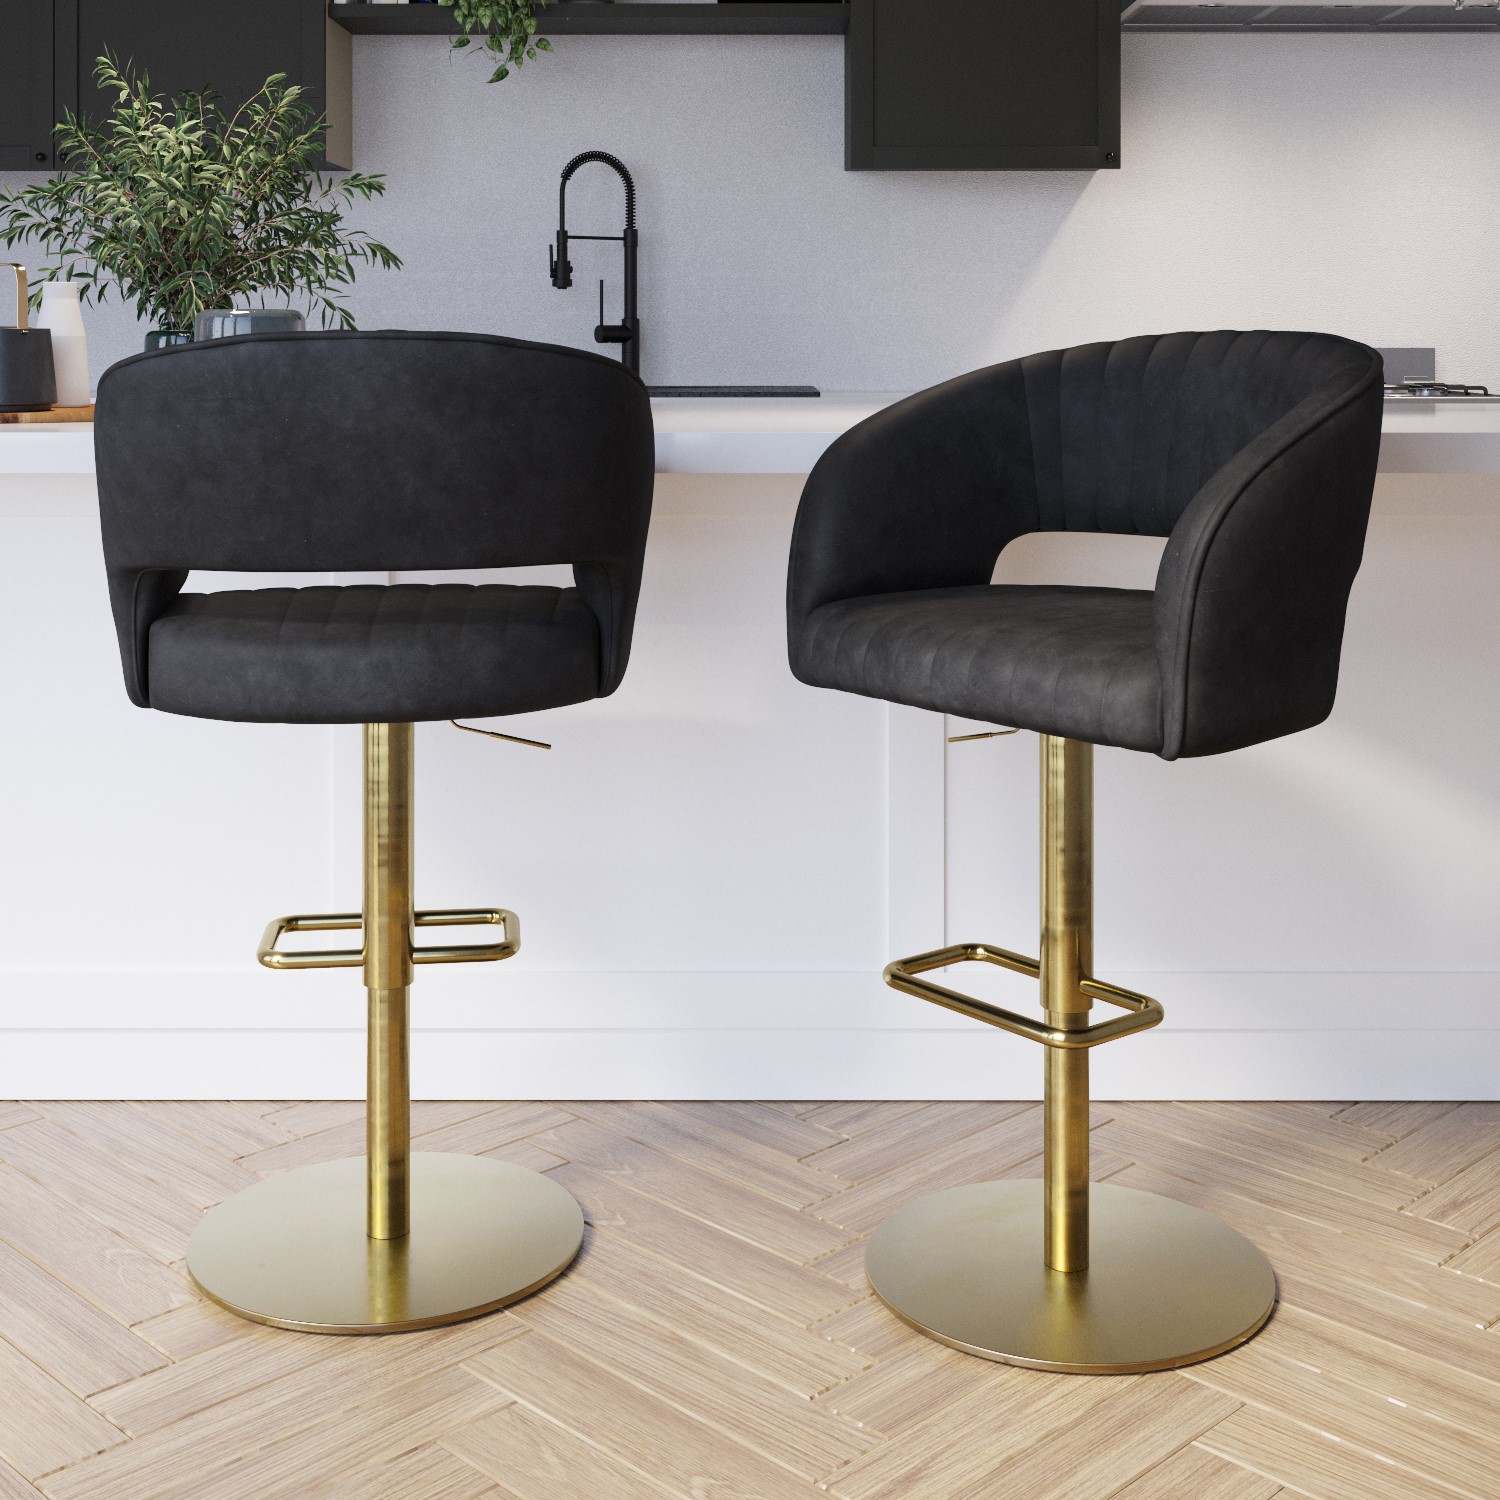 Photo of Set of 2 curved black faux leather adjustable swivel bar stool with brass base - runa